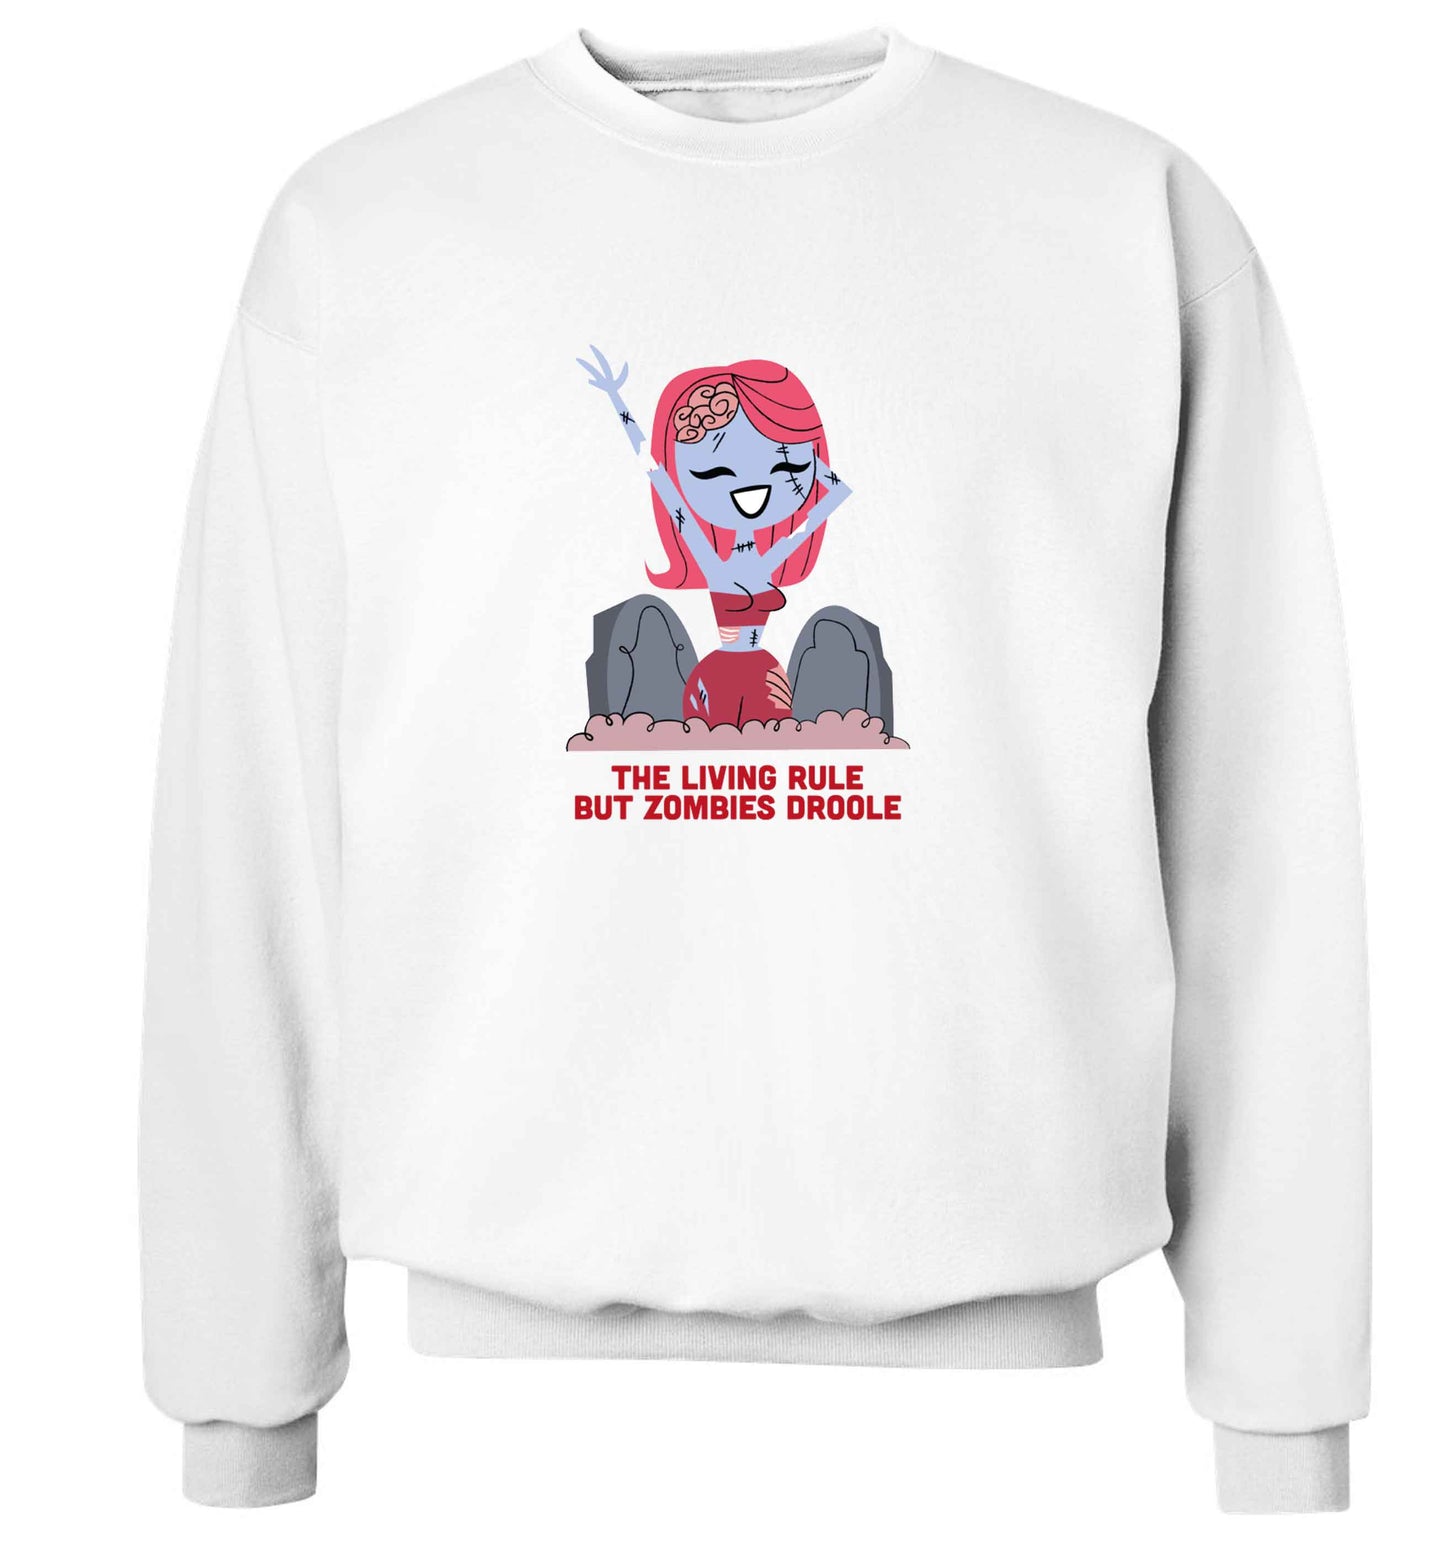 Living rule but zombies droole adult's unisex white sweater 2XL